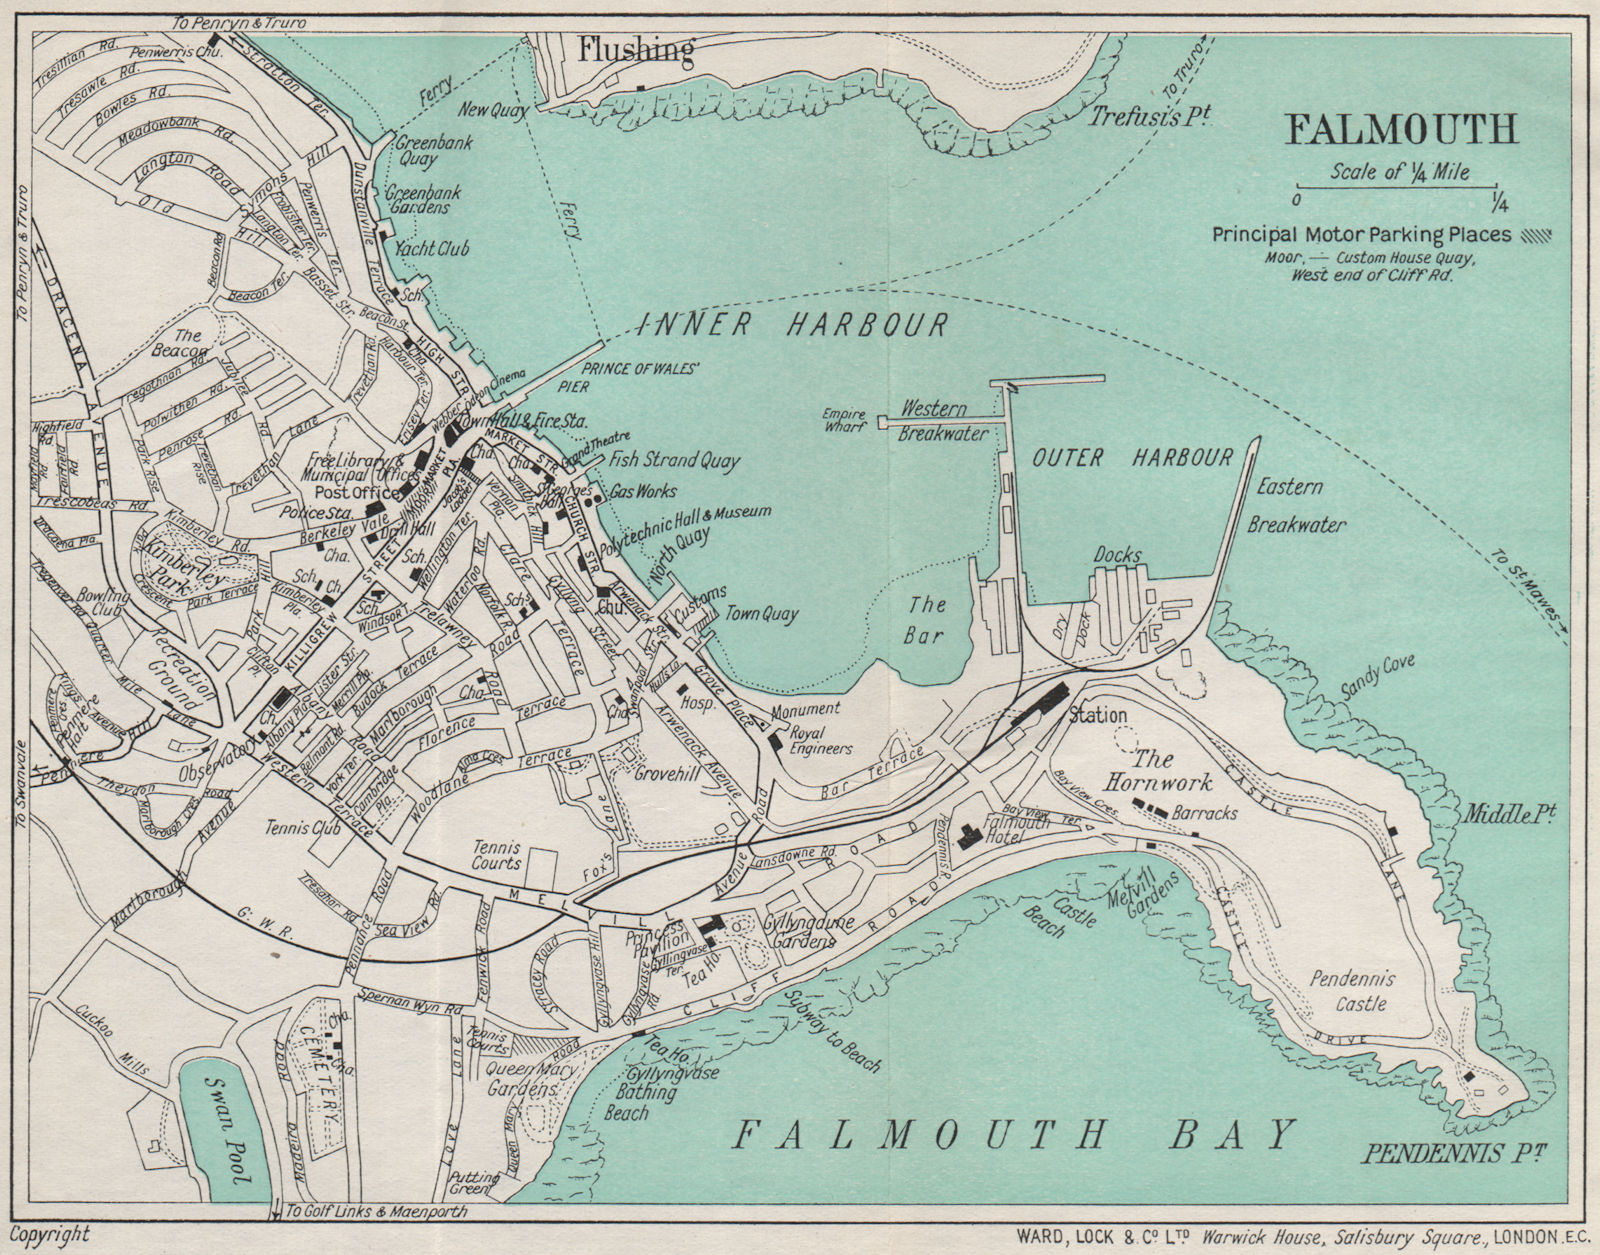 Associate Product FALMOUTH vintage town/city plan. Cornwall. WARD LOCK 1938 old vintage map